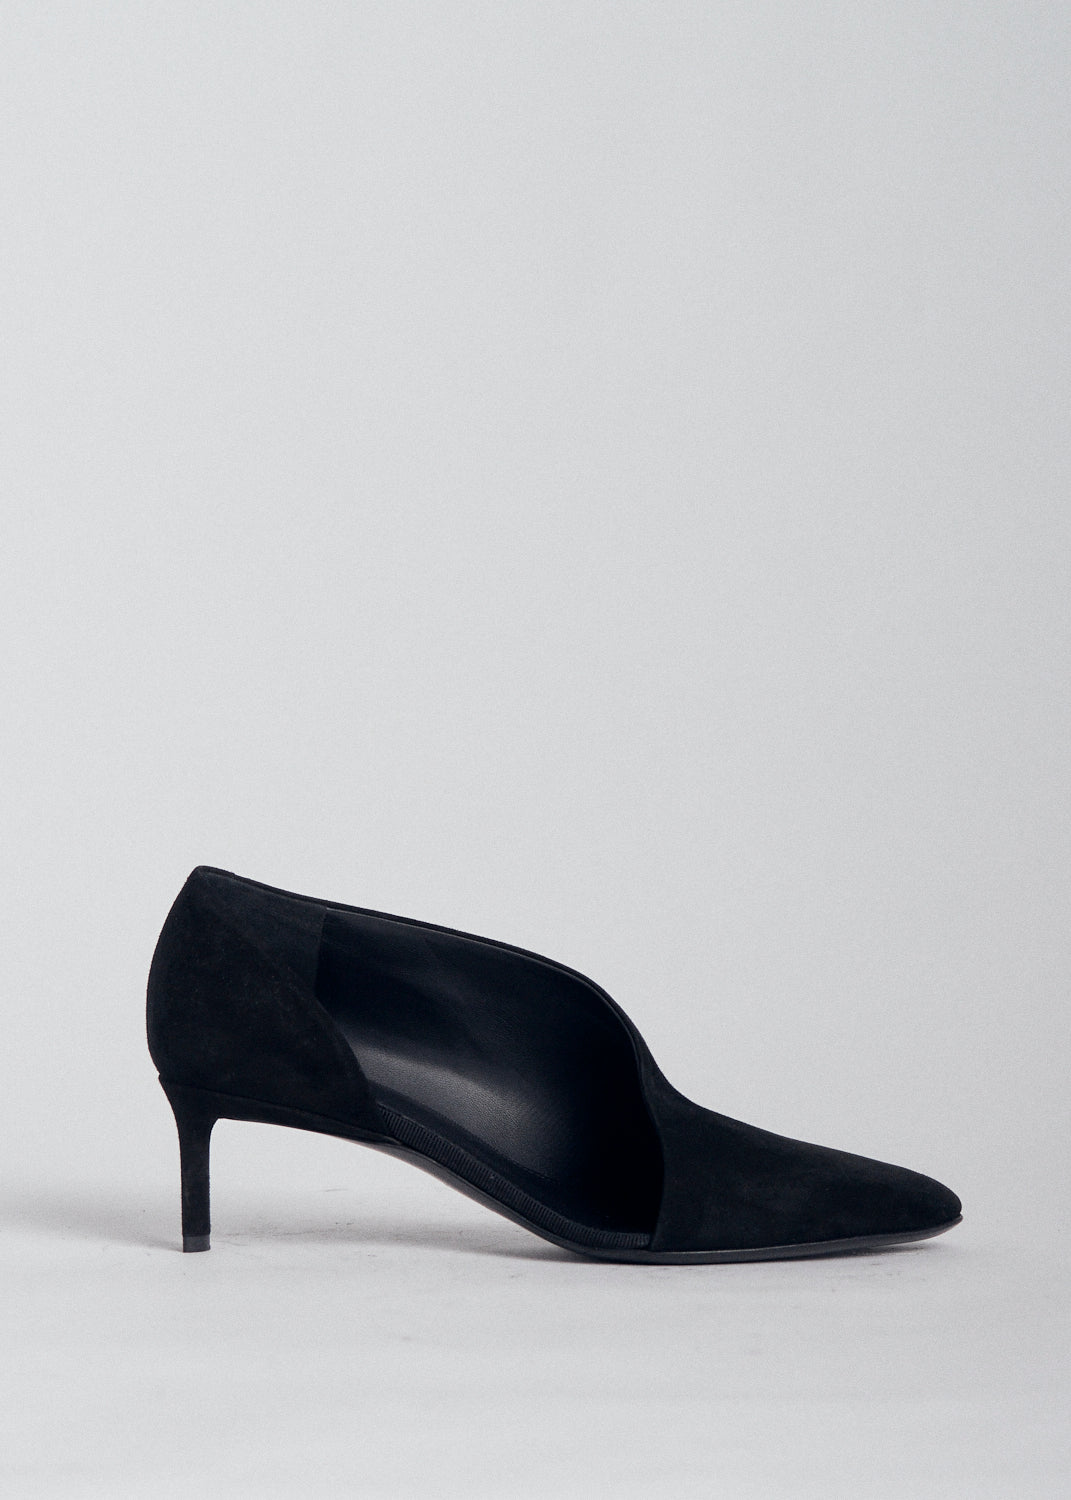 Asymmetric Pump in Suede - Black - CO Collections